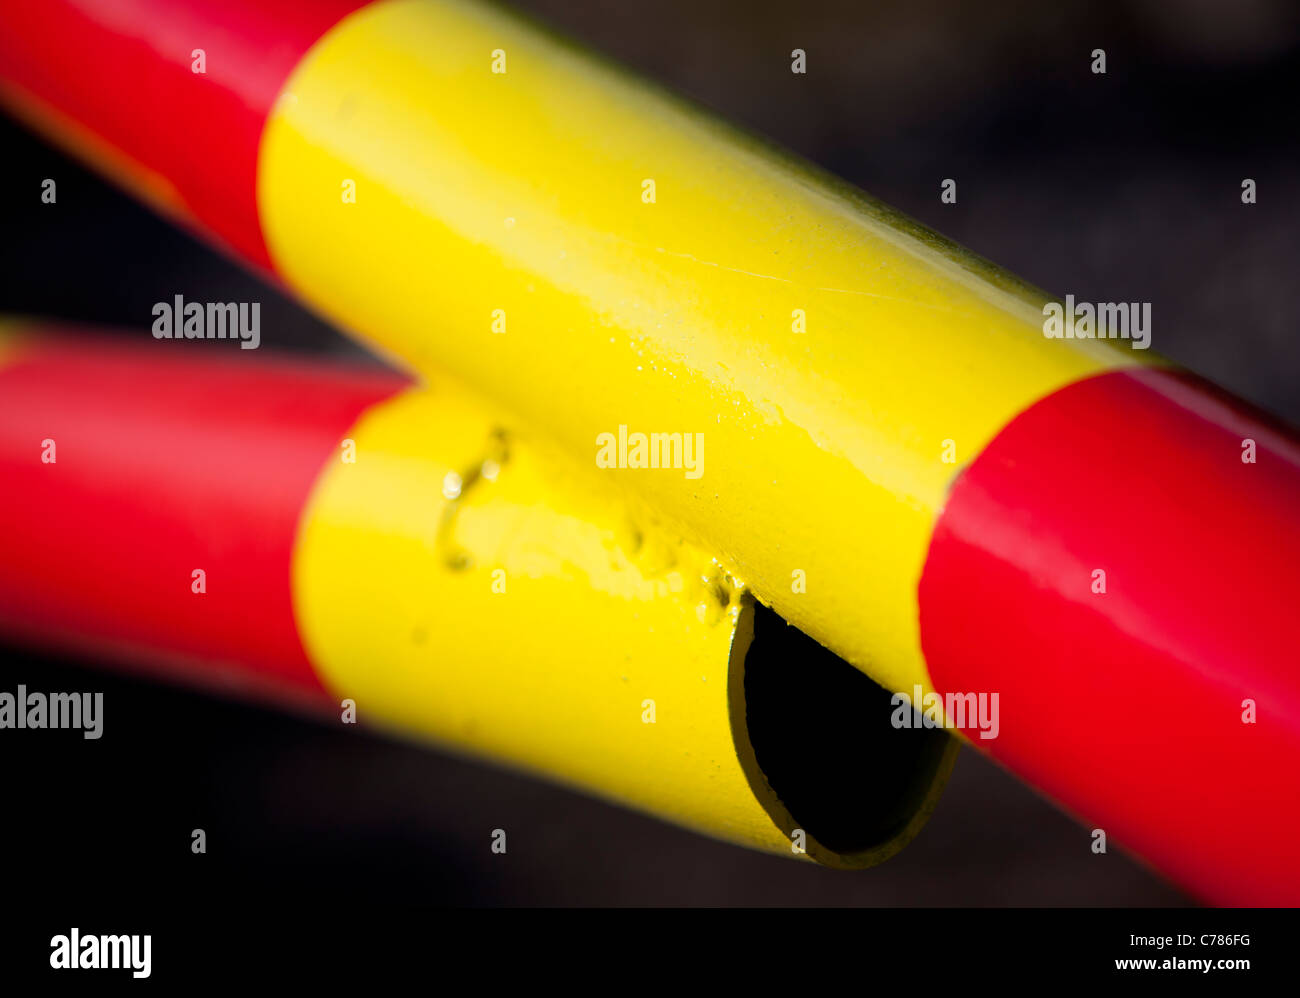 Closeup of red and yellow striped metal boom Stock Photo